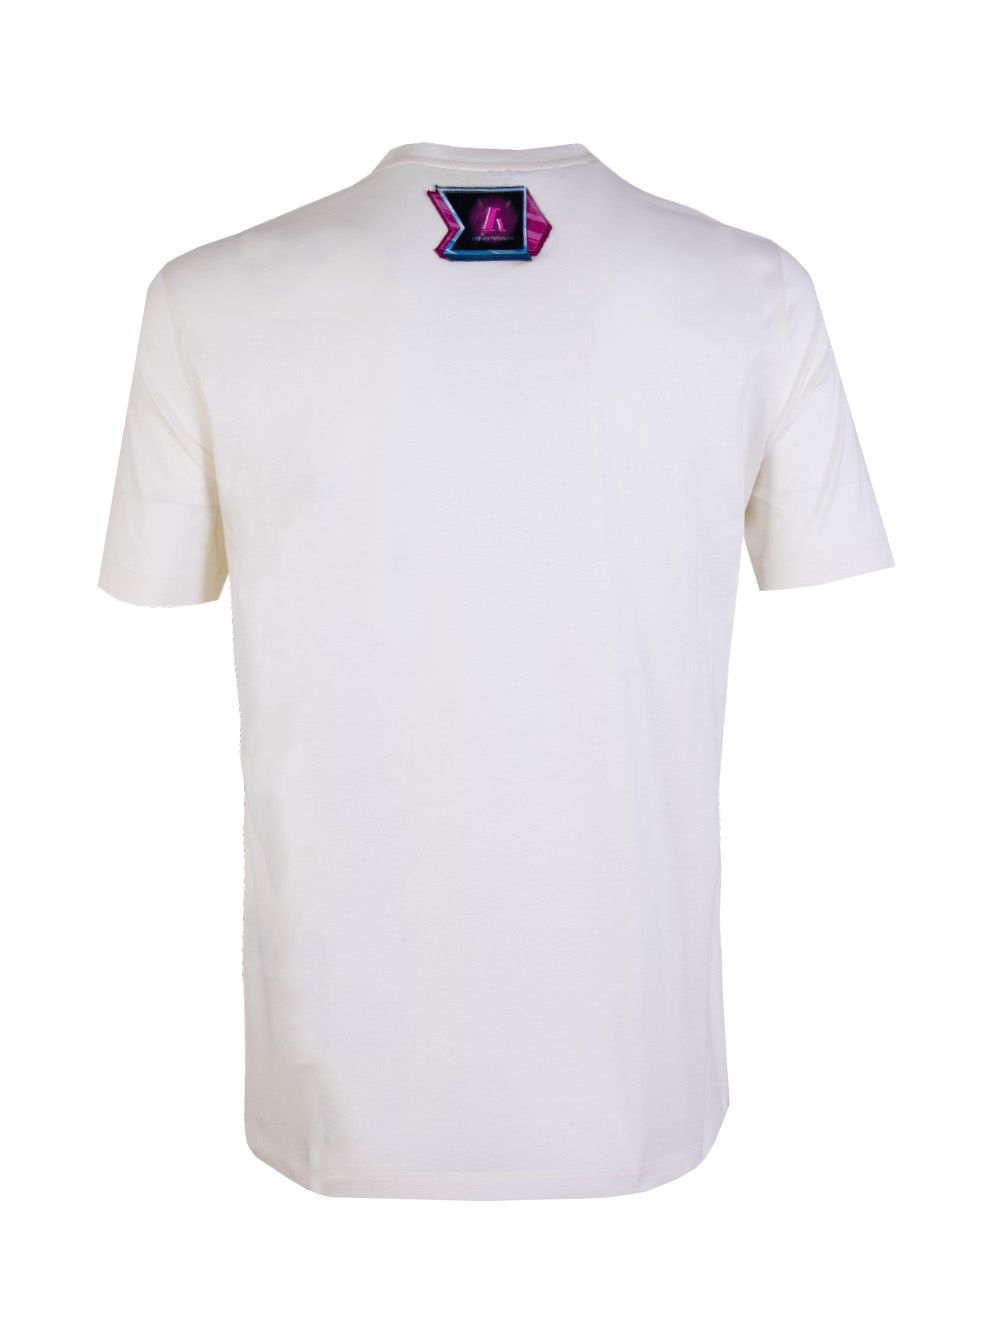 Emporio Armani Sophisticated White Cotton Tee with Colorful Men's Print